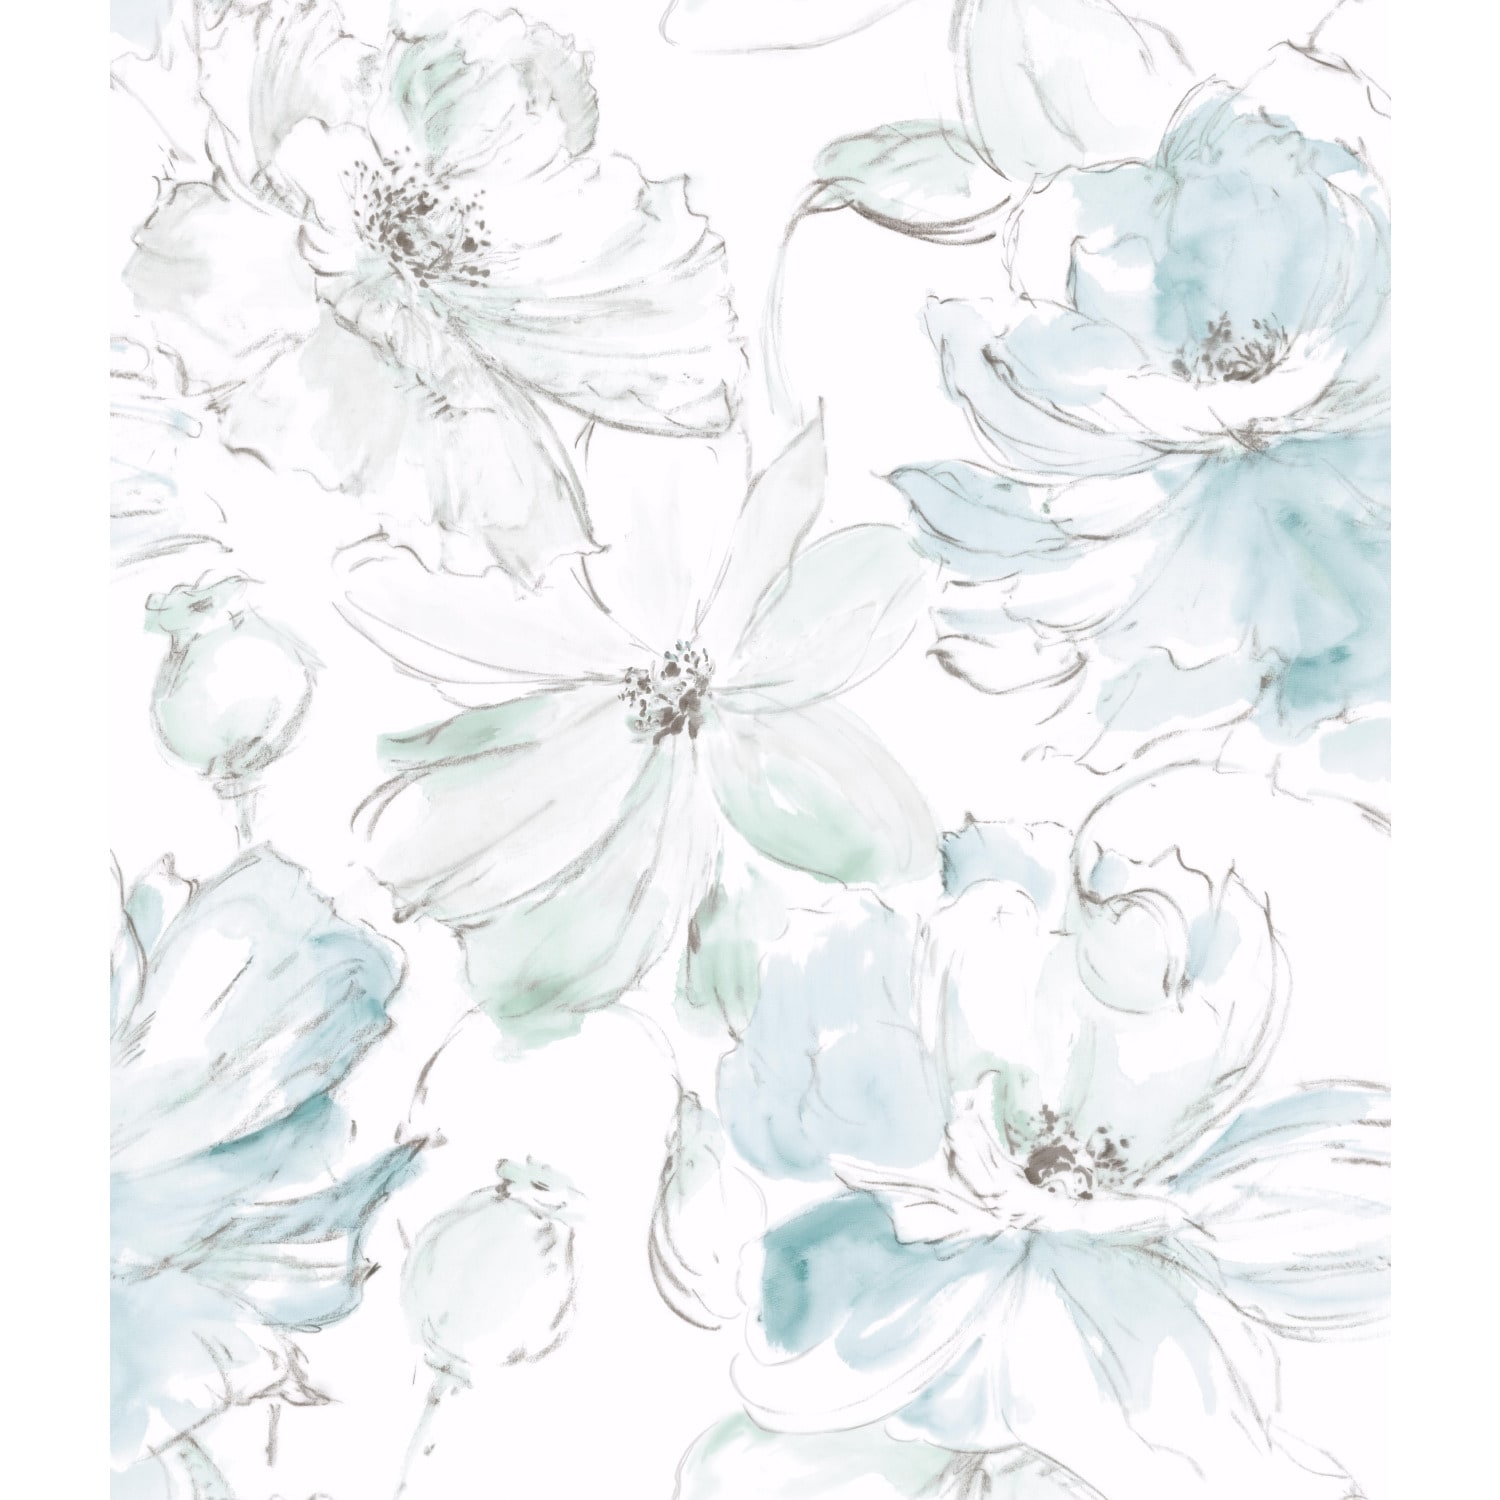 Full Bloom Off-White Floral Paper Strippable Roll (Covers 56.4 sq. ft.)